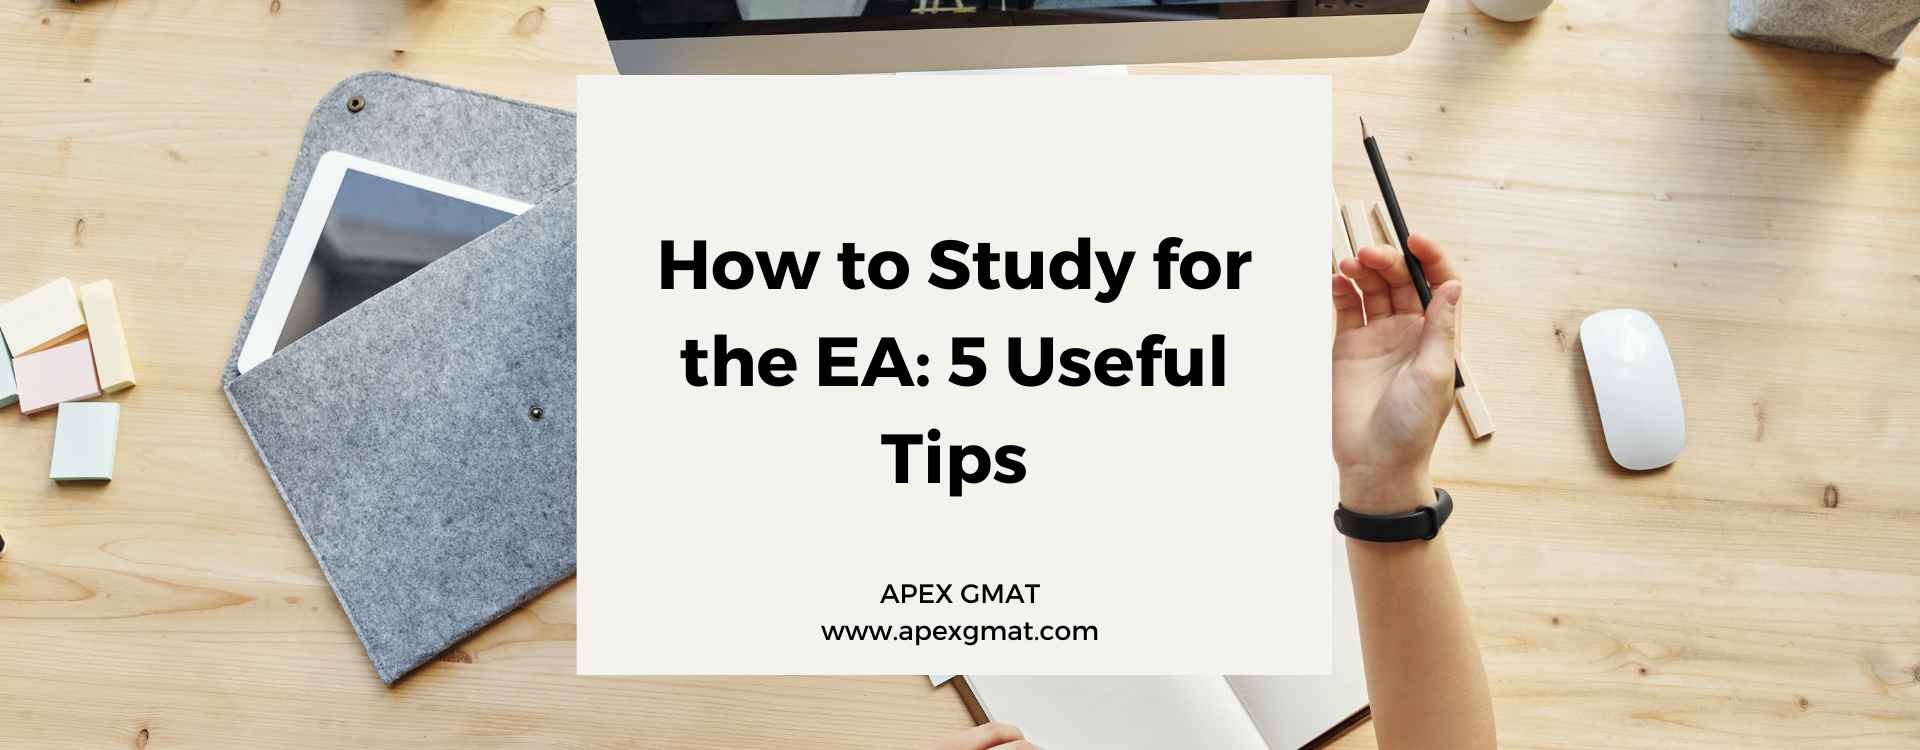 How to Study for the EA: 5 Useful Tips